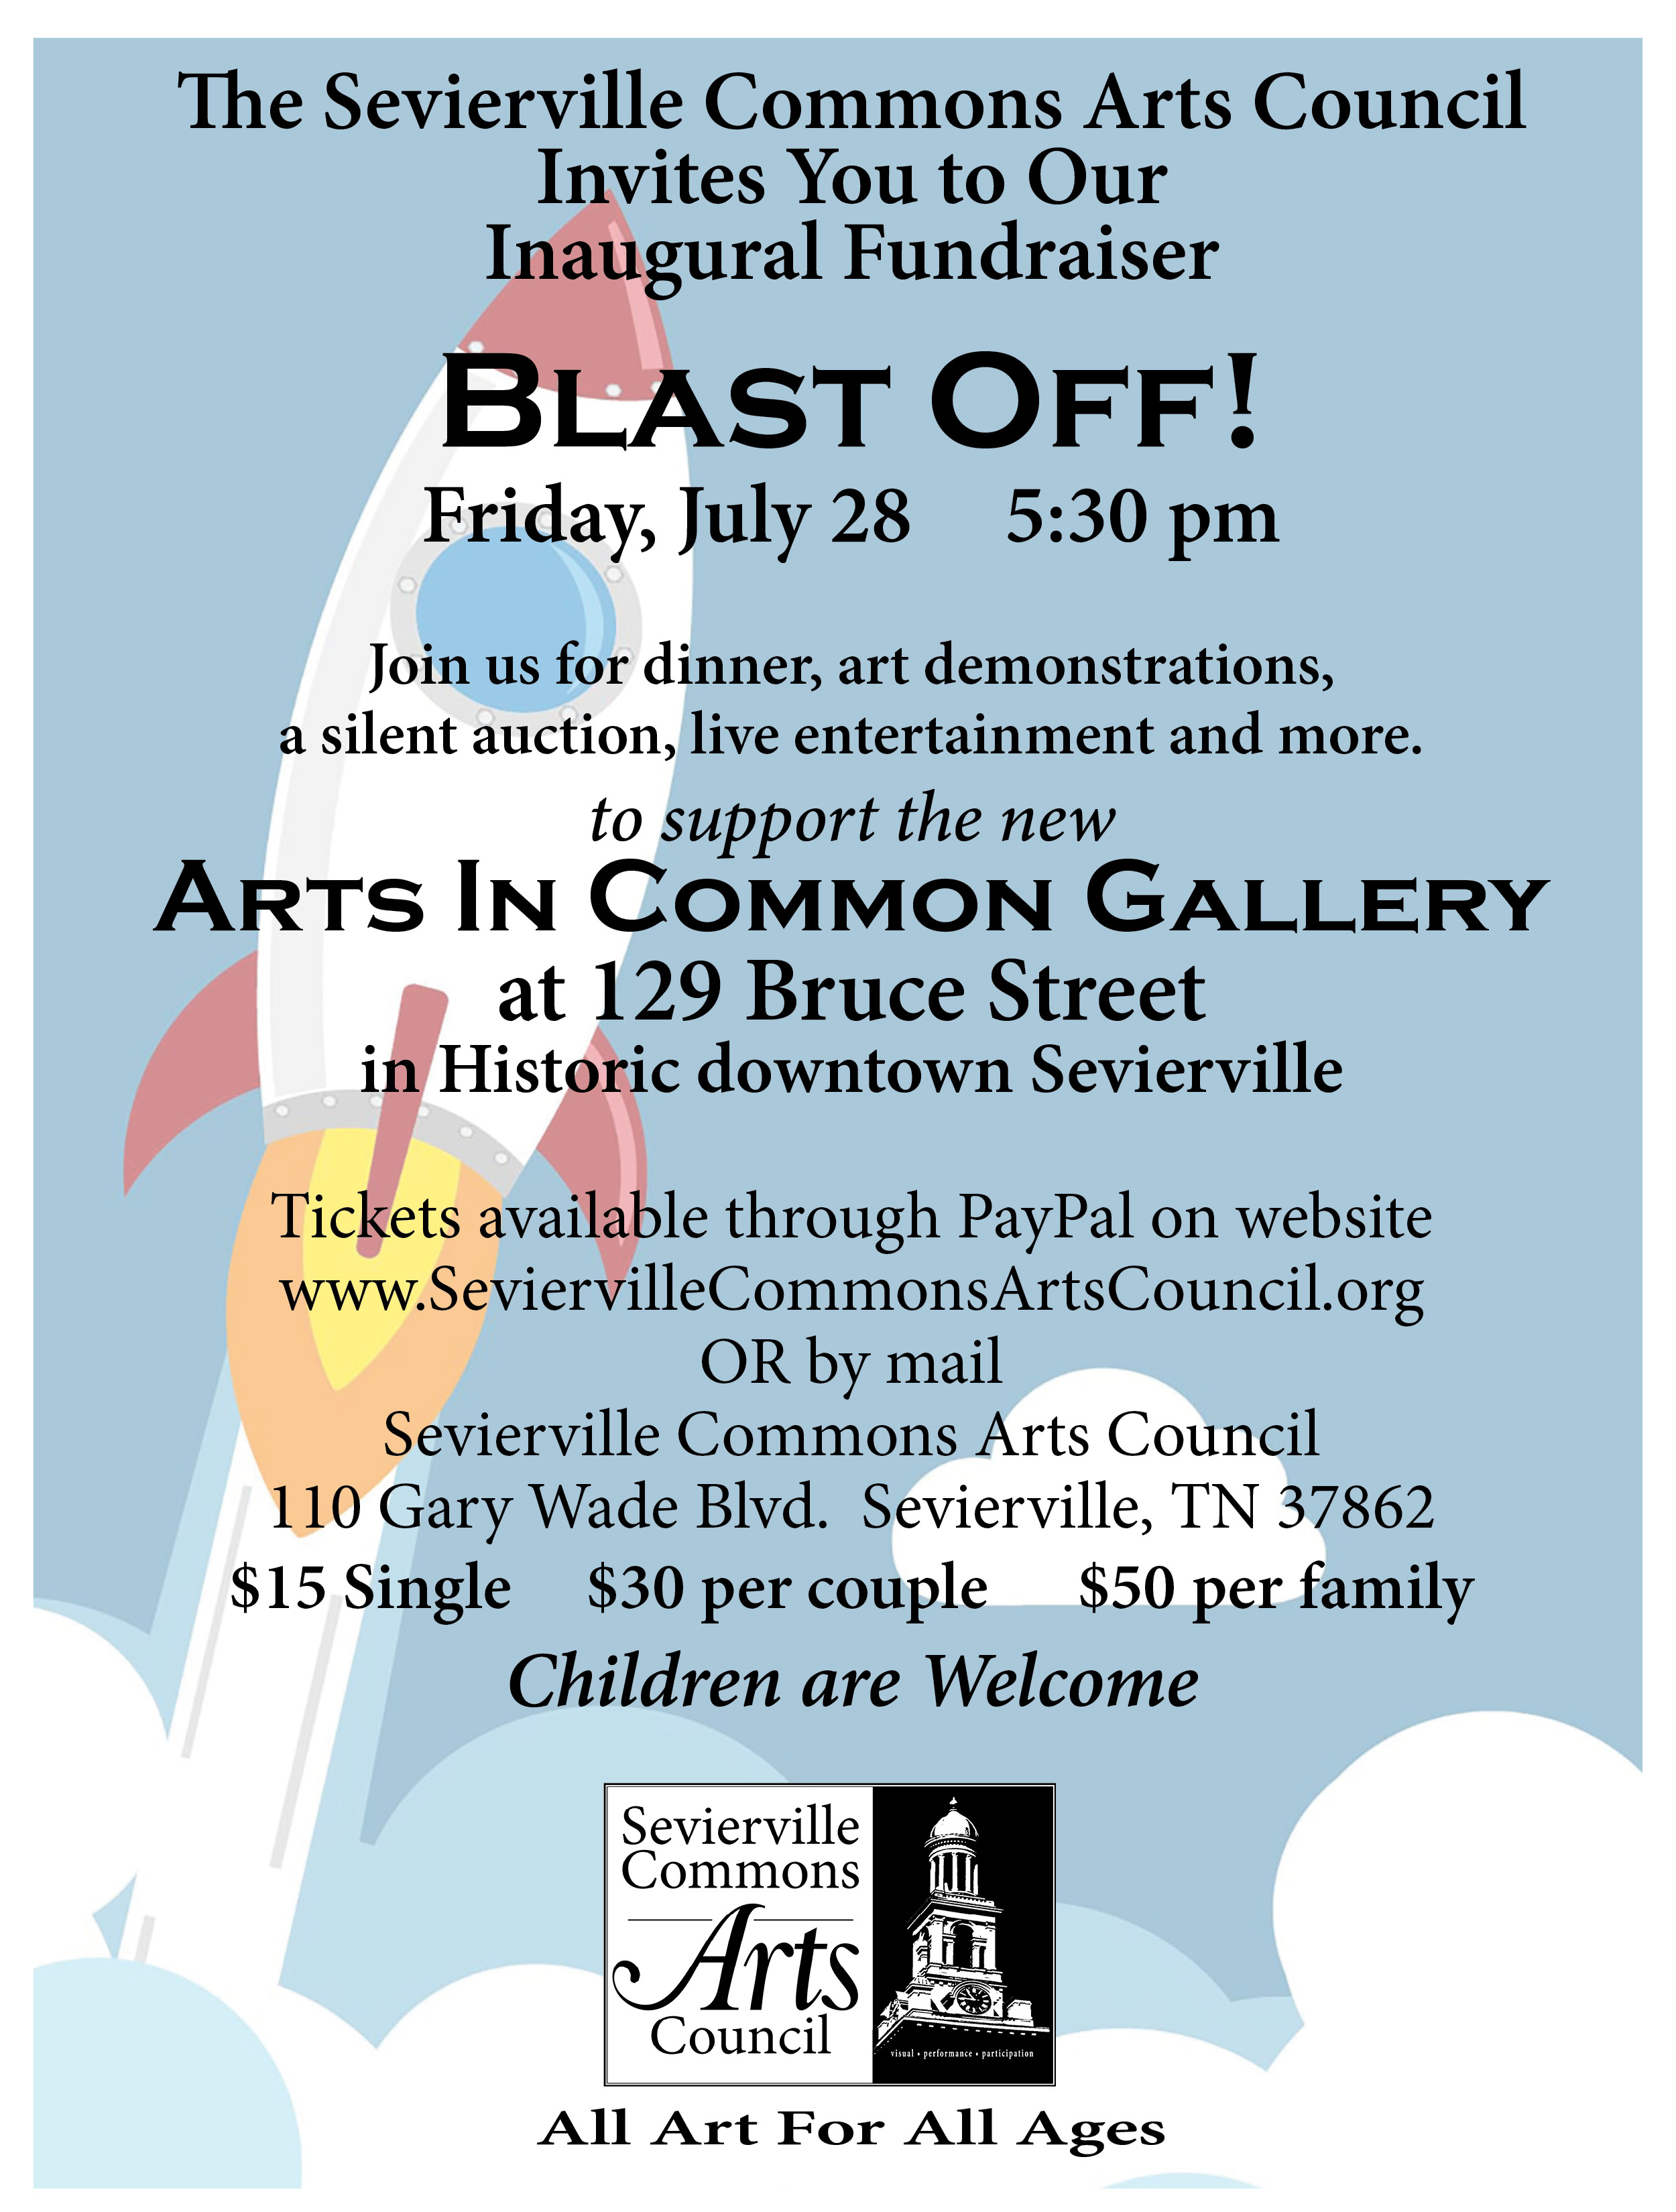 The Sevierville Commons Arts Council Invites You to Our Inaugural Fundraiser